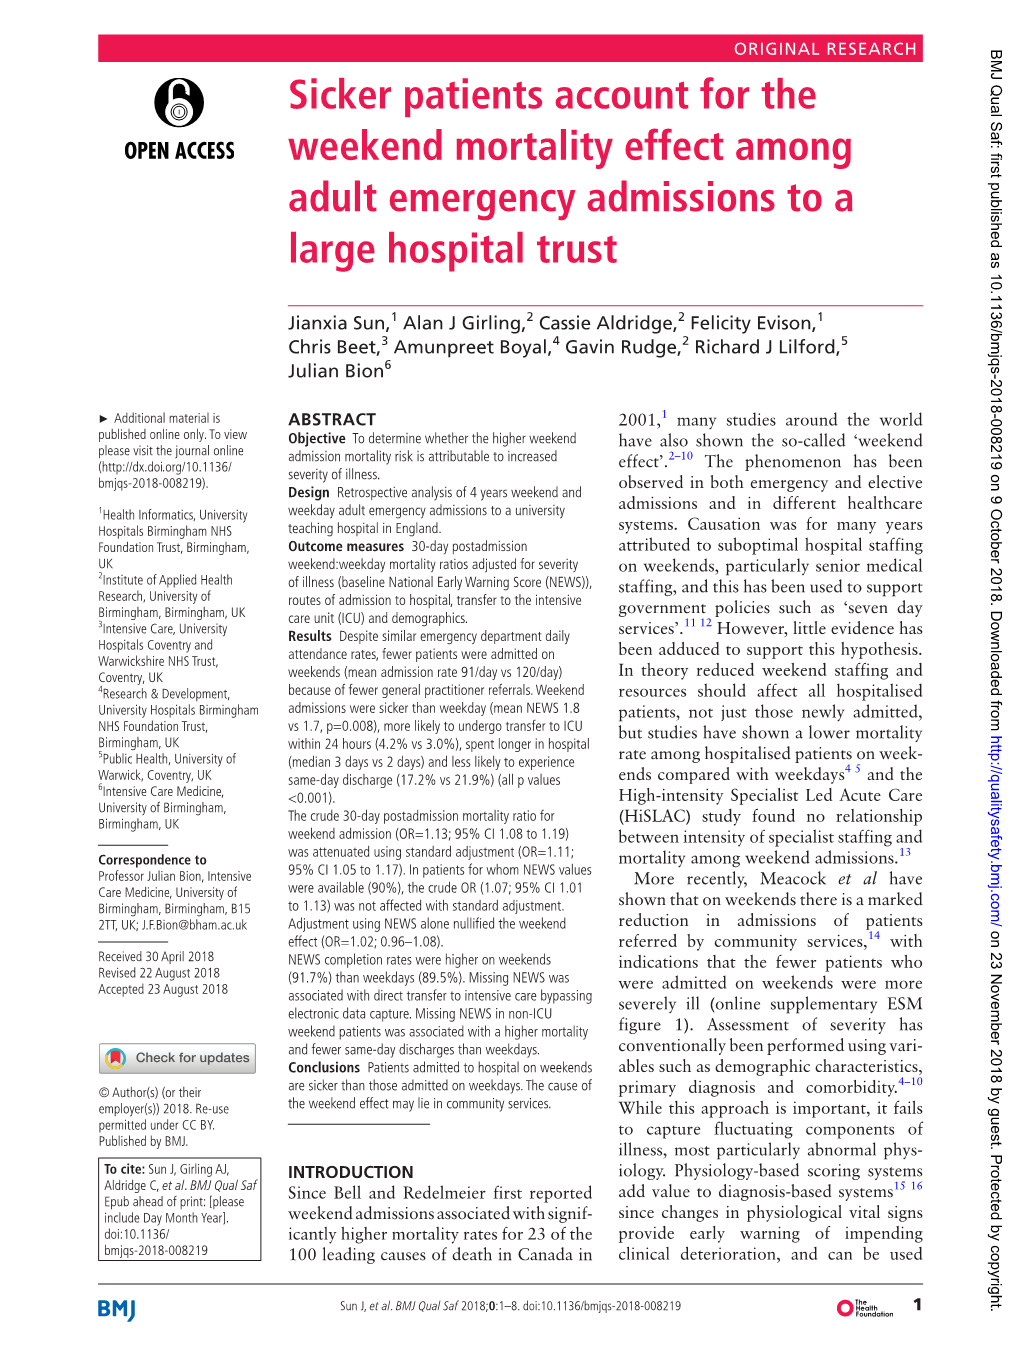 Sicker Patients Account for the Weekend Mortality Effect Among Adult Emergency Admissions to a Large Hospital Trust